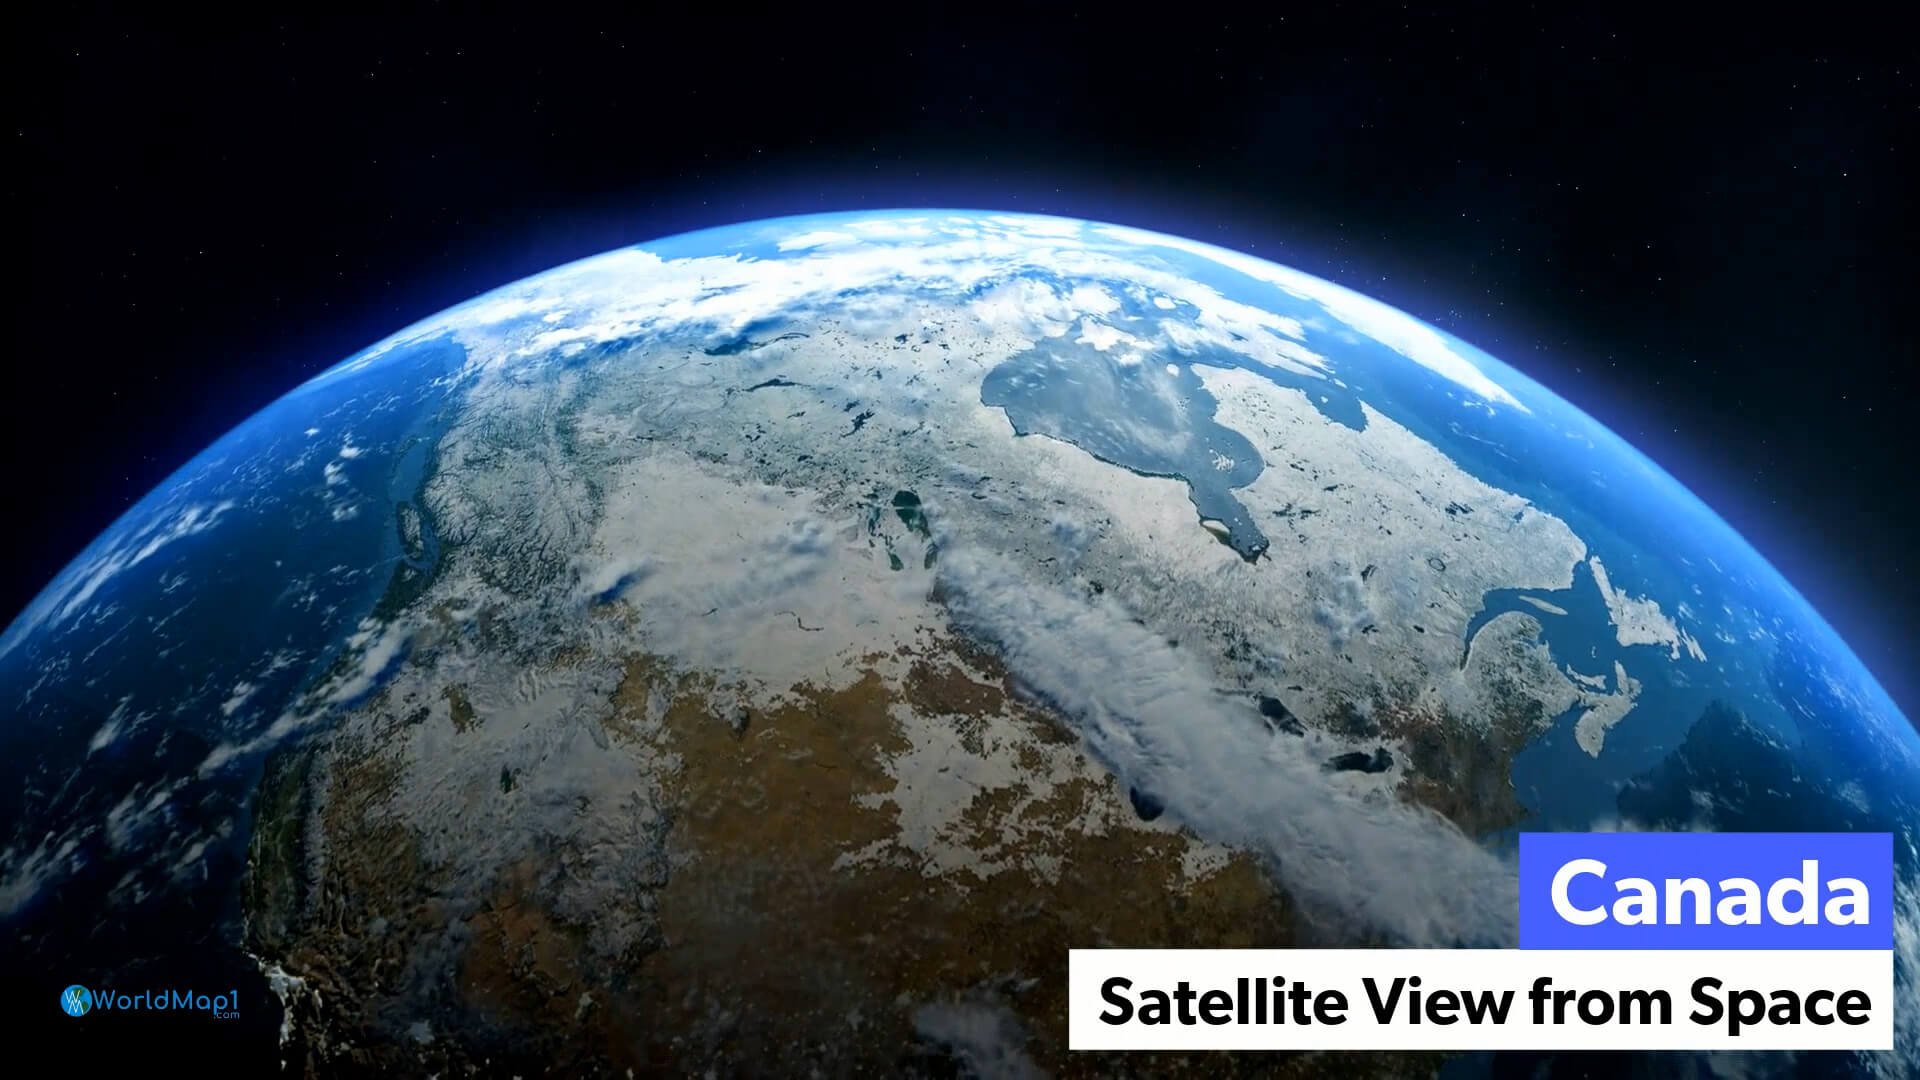 Canada Satellite View from Space